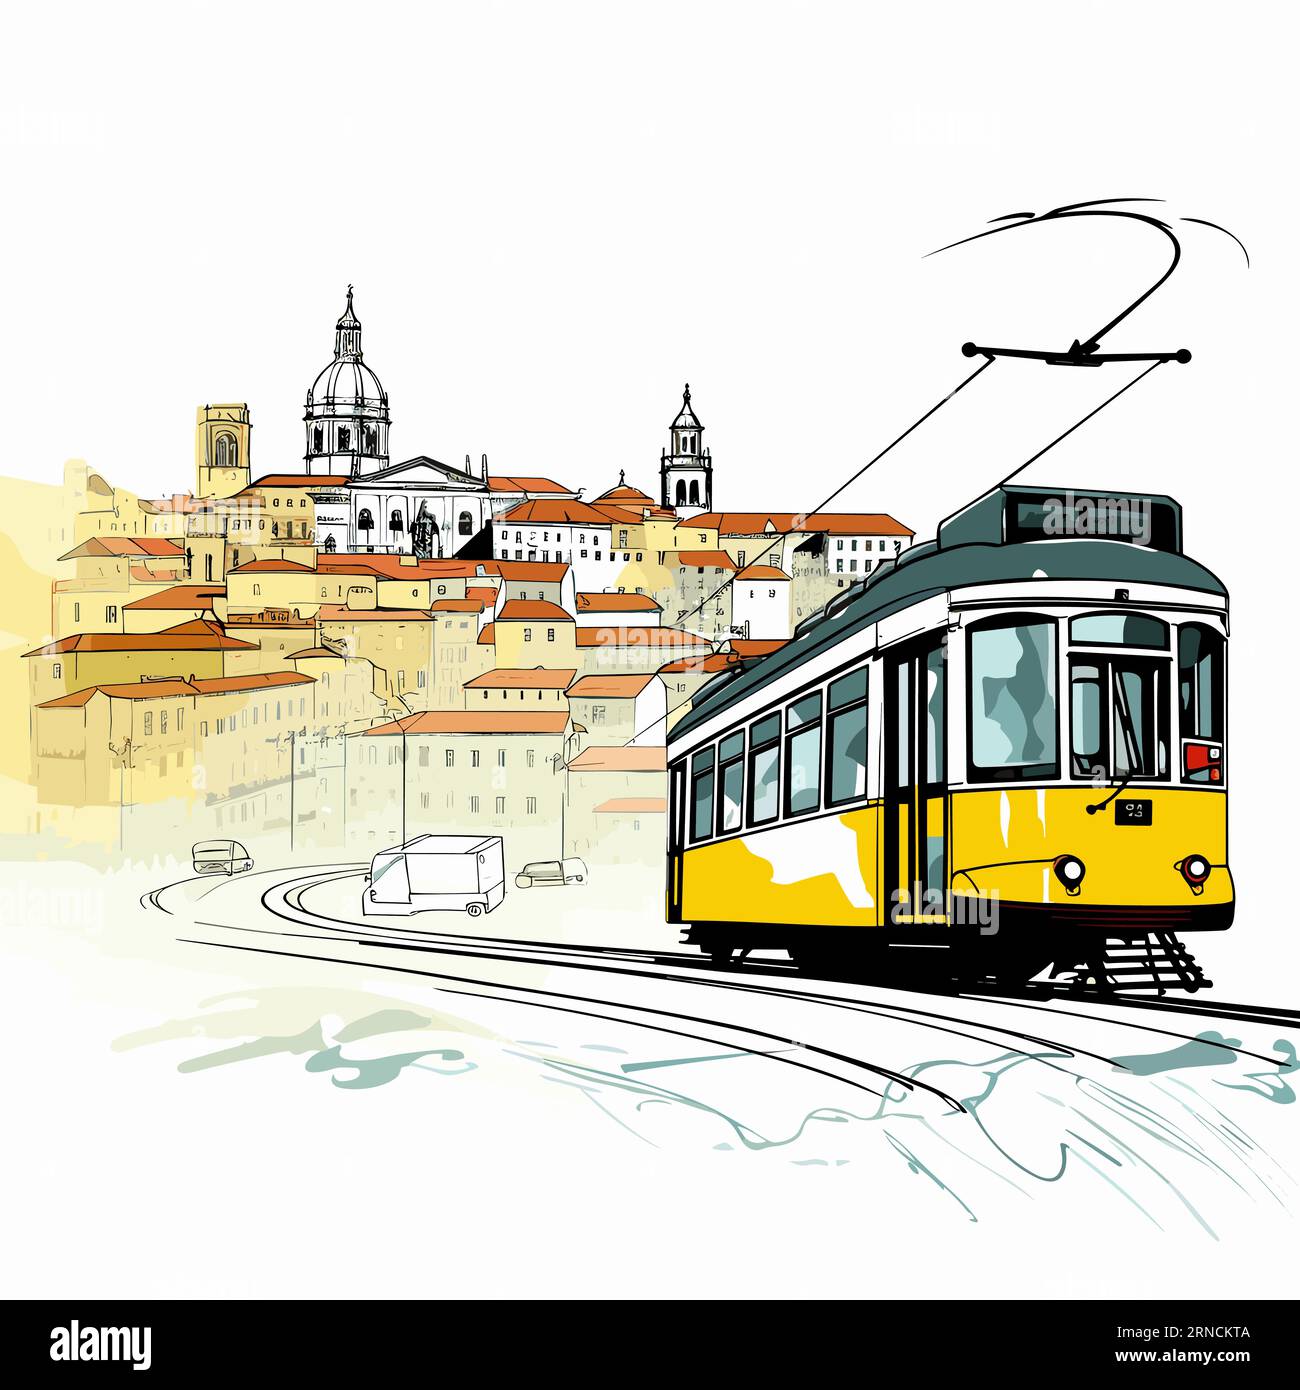 Portugal Illustration Trams And Trains, In The Style Of Elegant Cityscapes, Graphic Contours, Yellow And Bronze, Flowing Brushwork Stock Vector